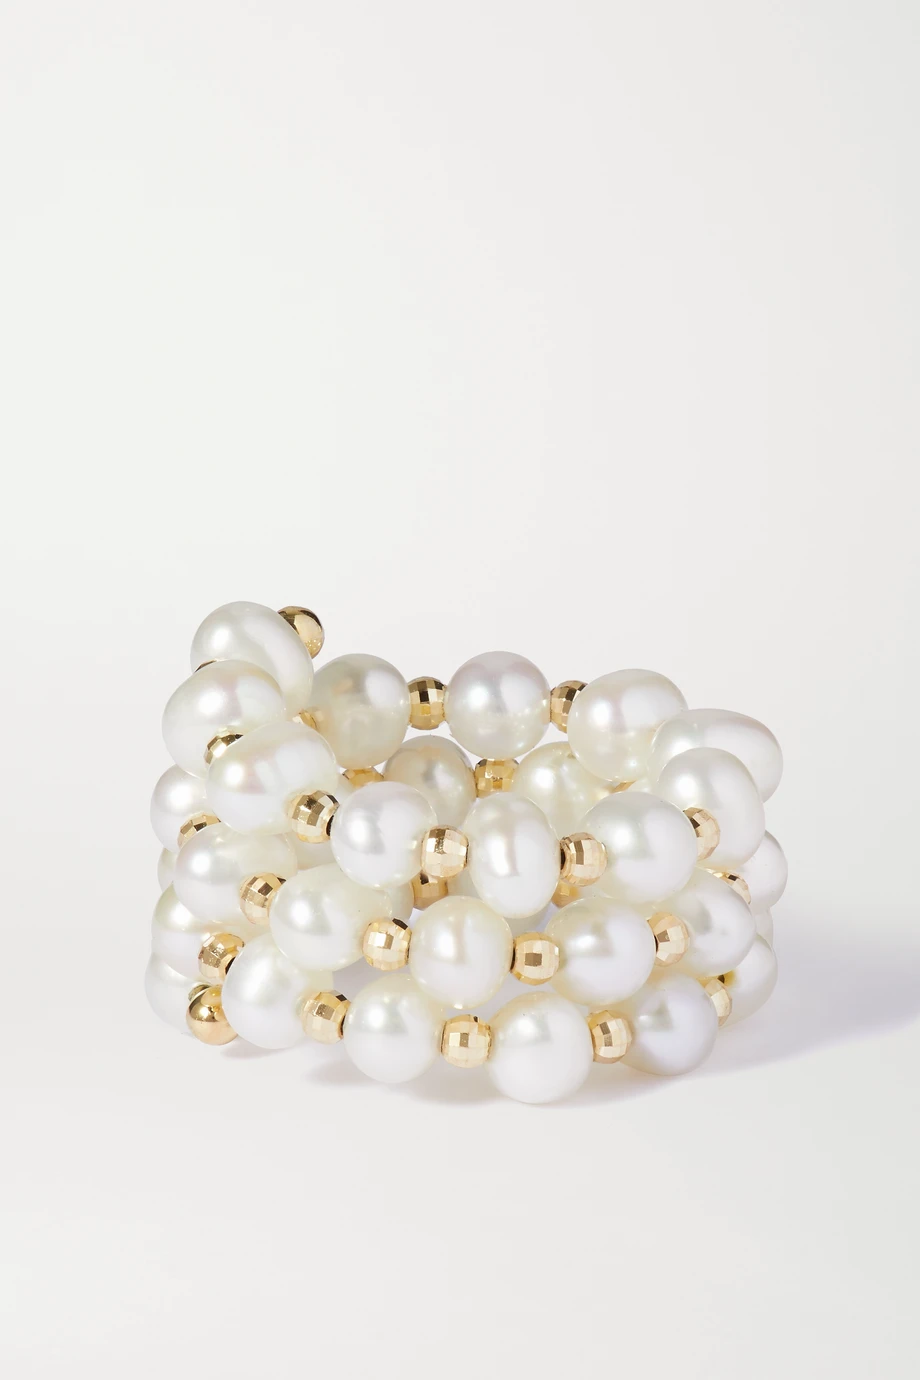 Natural pearl ring + gold plated details